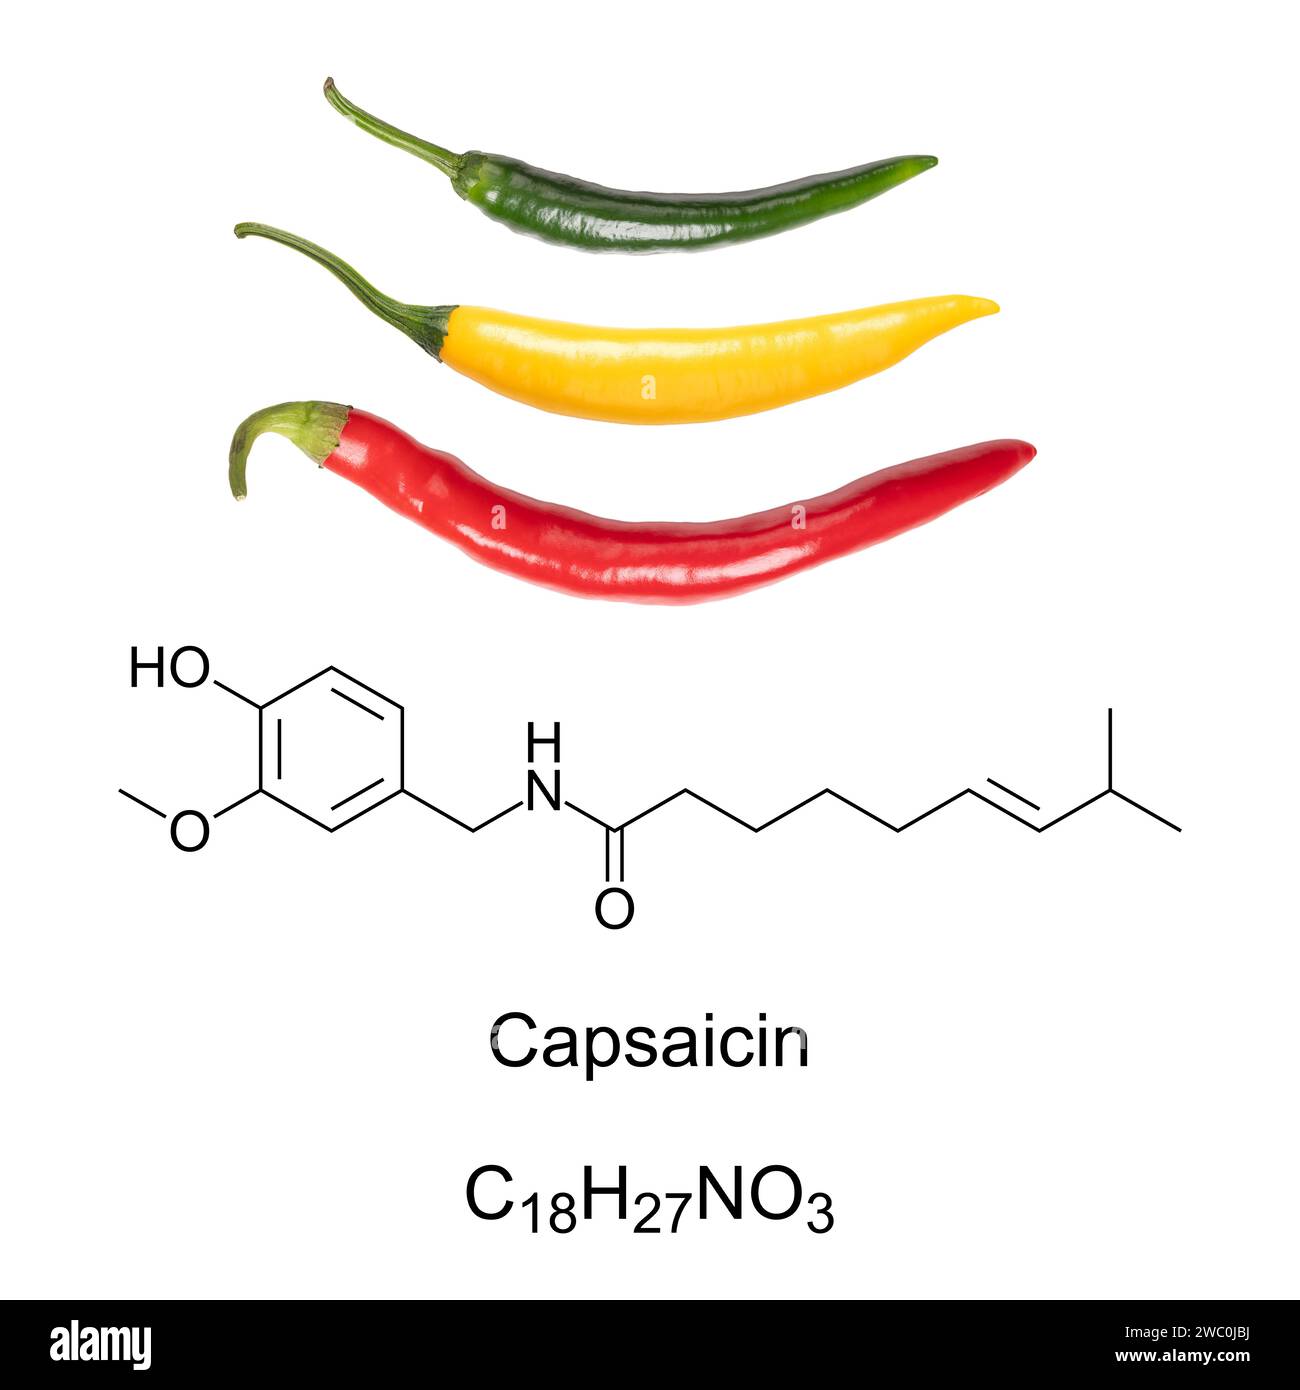 Cayenne chili peppers, and capsaicin chemical formula and structure. Capsaicin is the active component and chemical irritant in chili peppers. Stock Photo